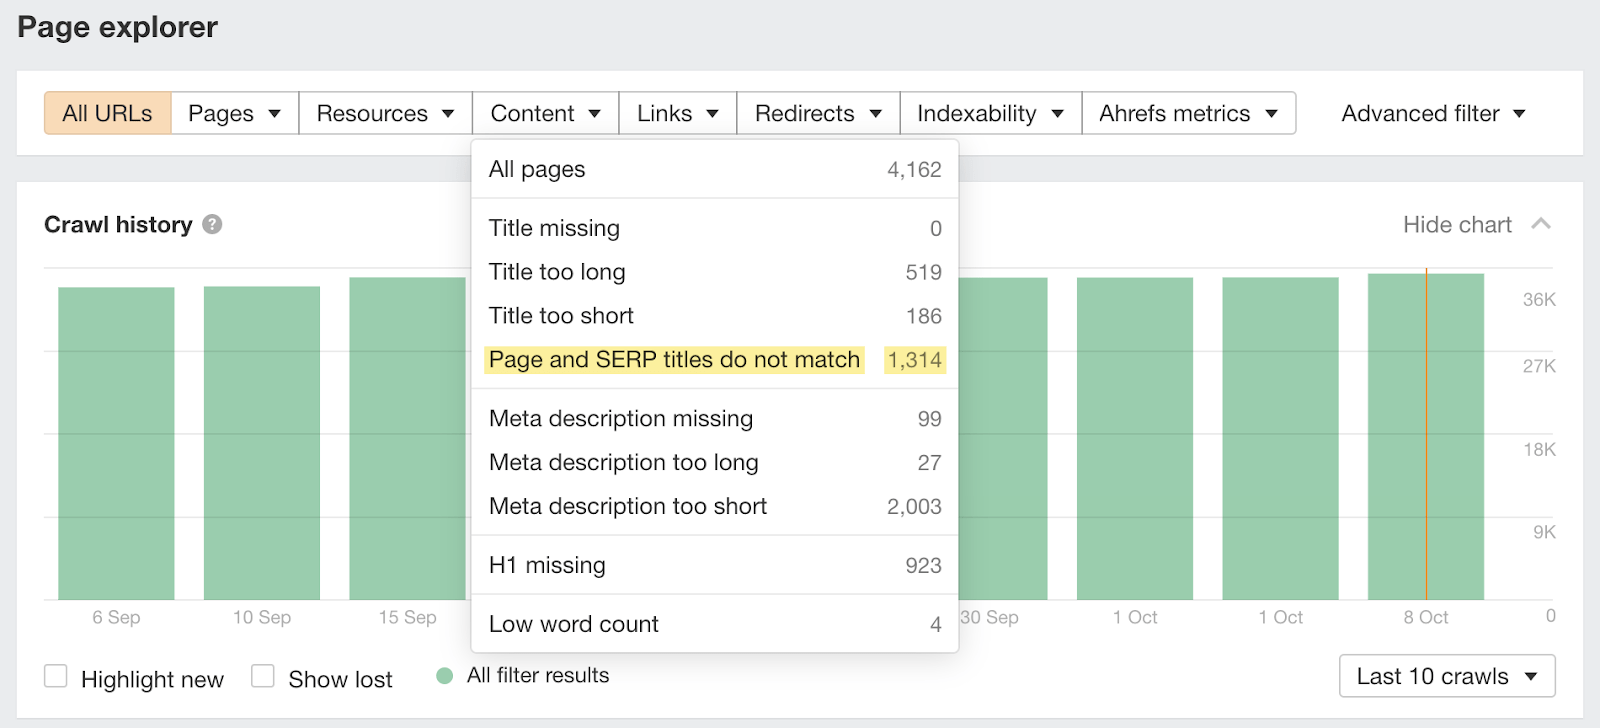 Page explorer report showing data on page and SERP titles that don't match